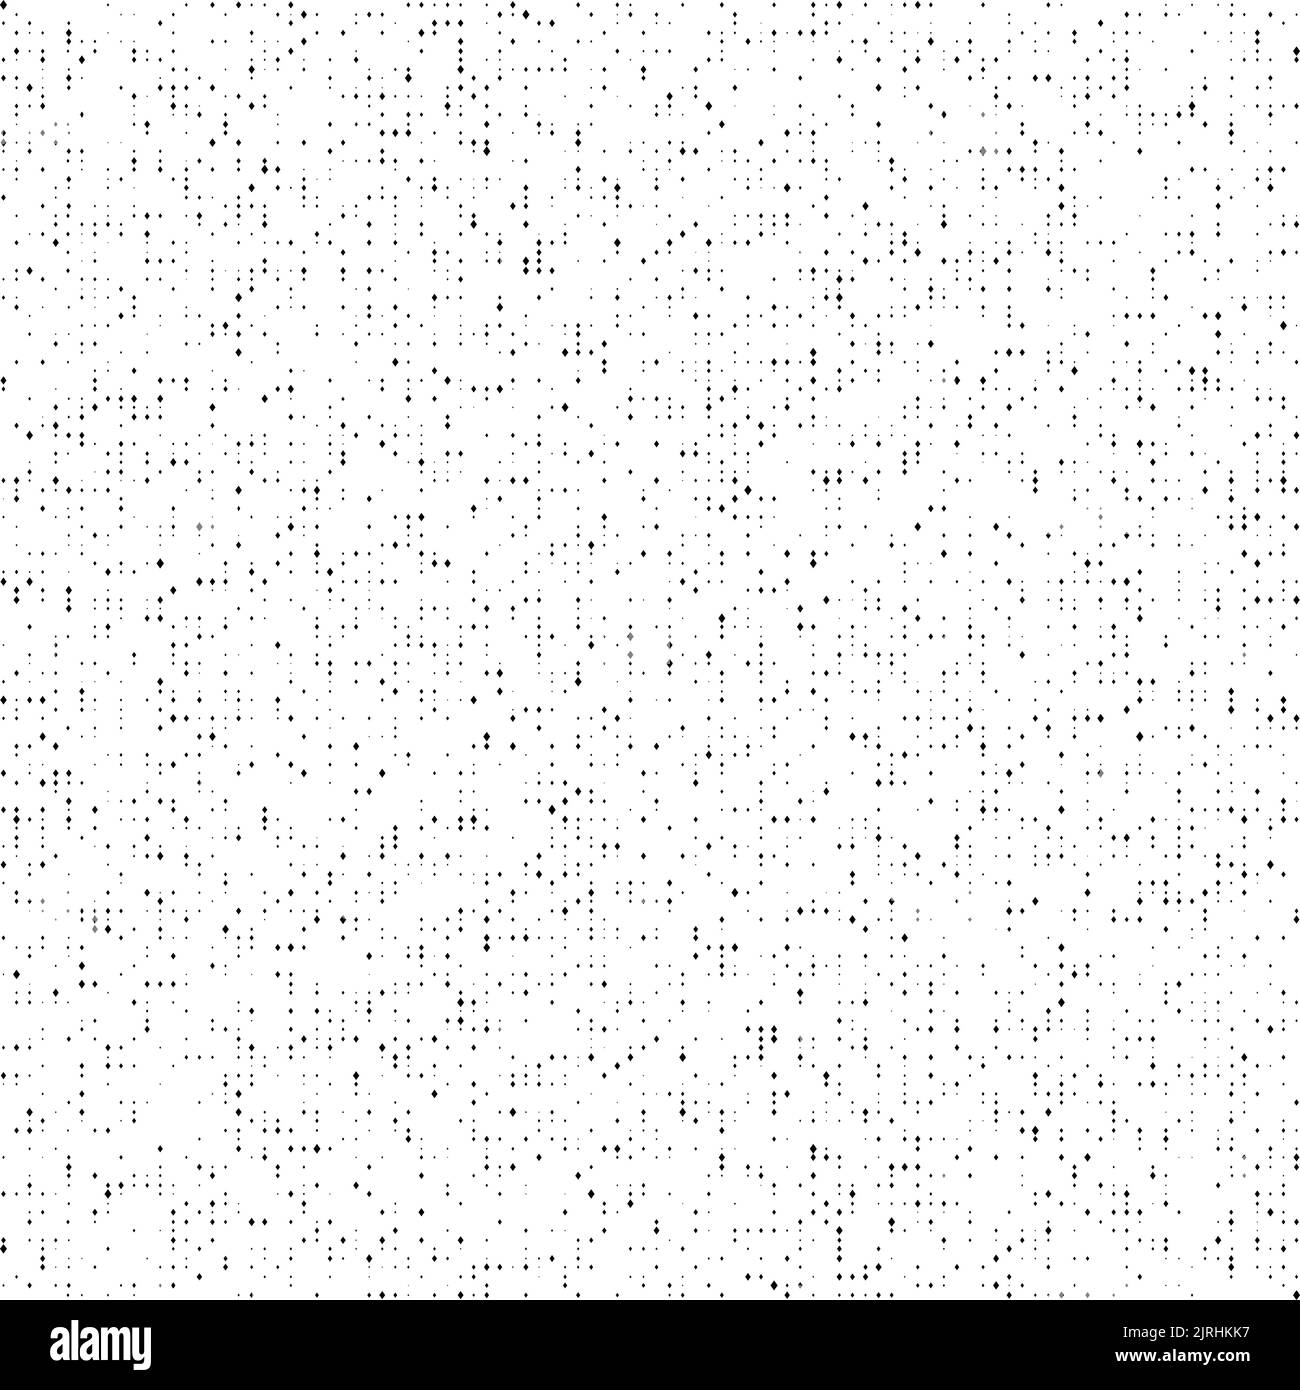 Halftone noise texture background. Comic style grain pattern. Pixelated rhomb particles wallpaper. Black and white grain and dots overlay. Dust Stock Vector